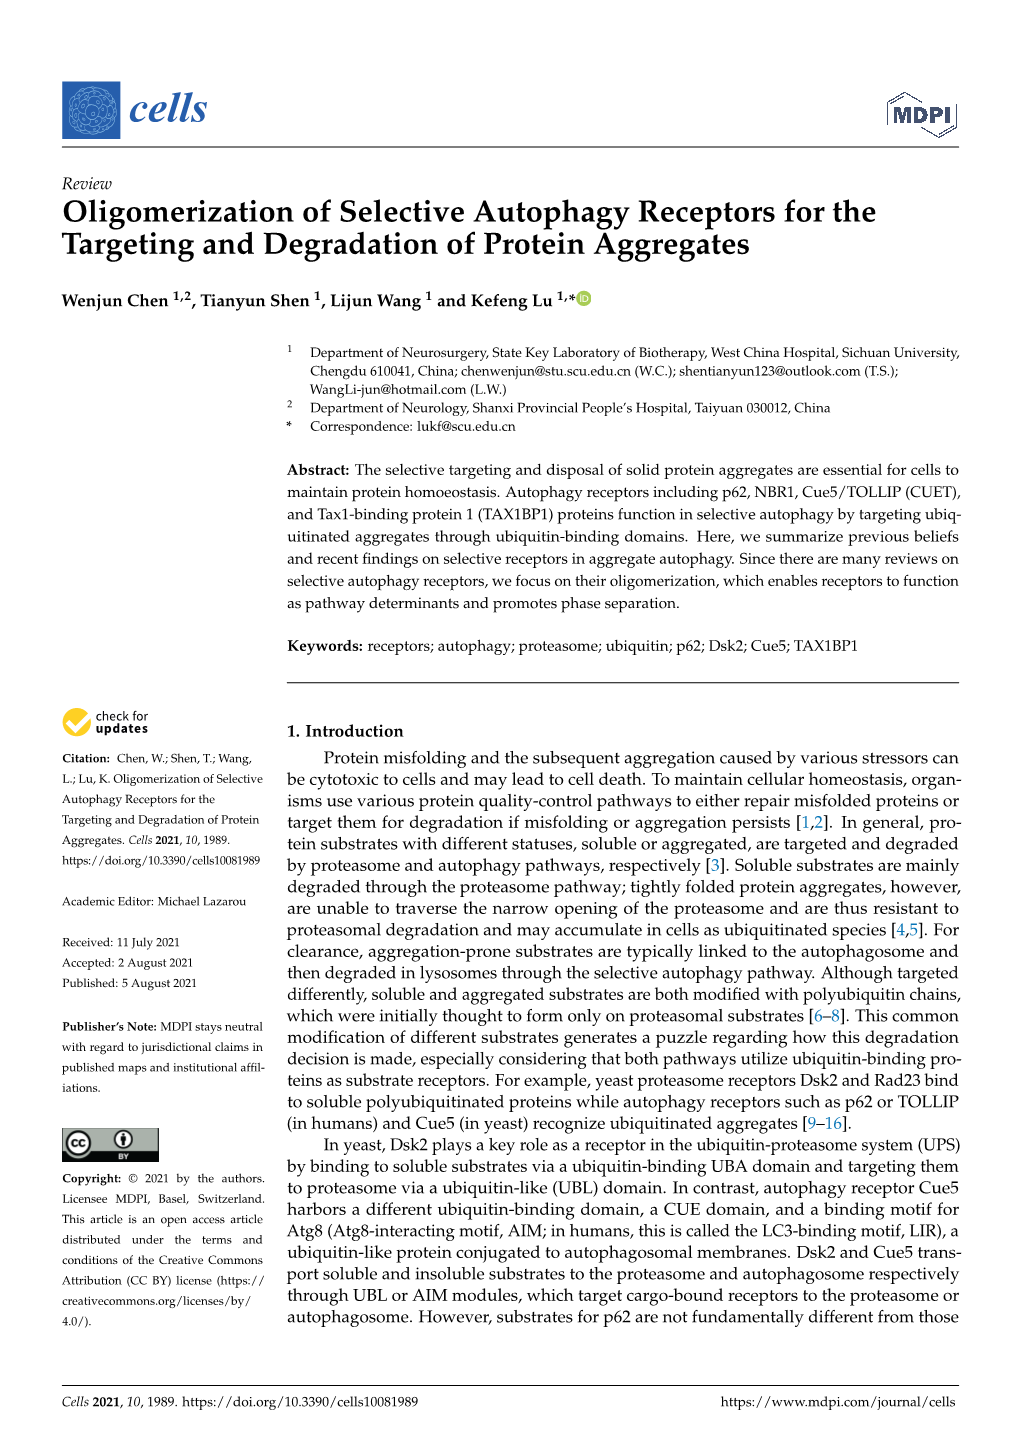 Oligomerization of Selective Autophagy Receptors for the Targeting and Degradation of Protein Aggregates